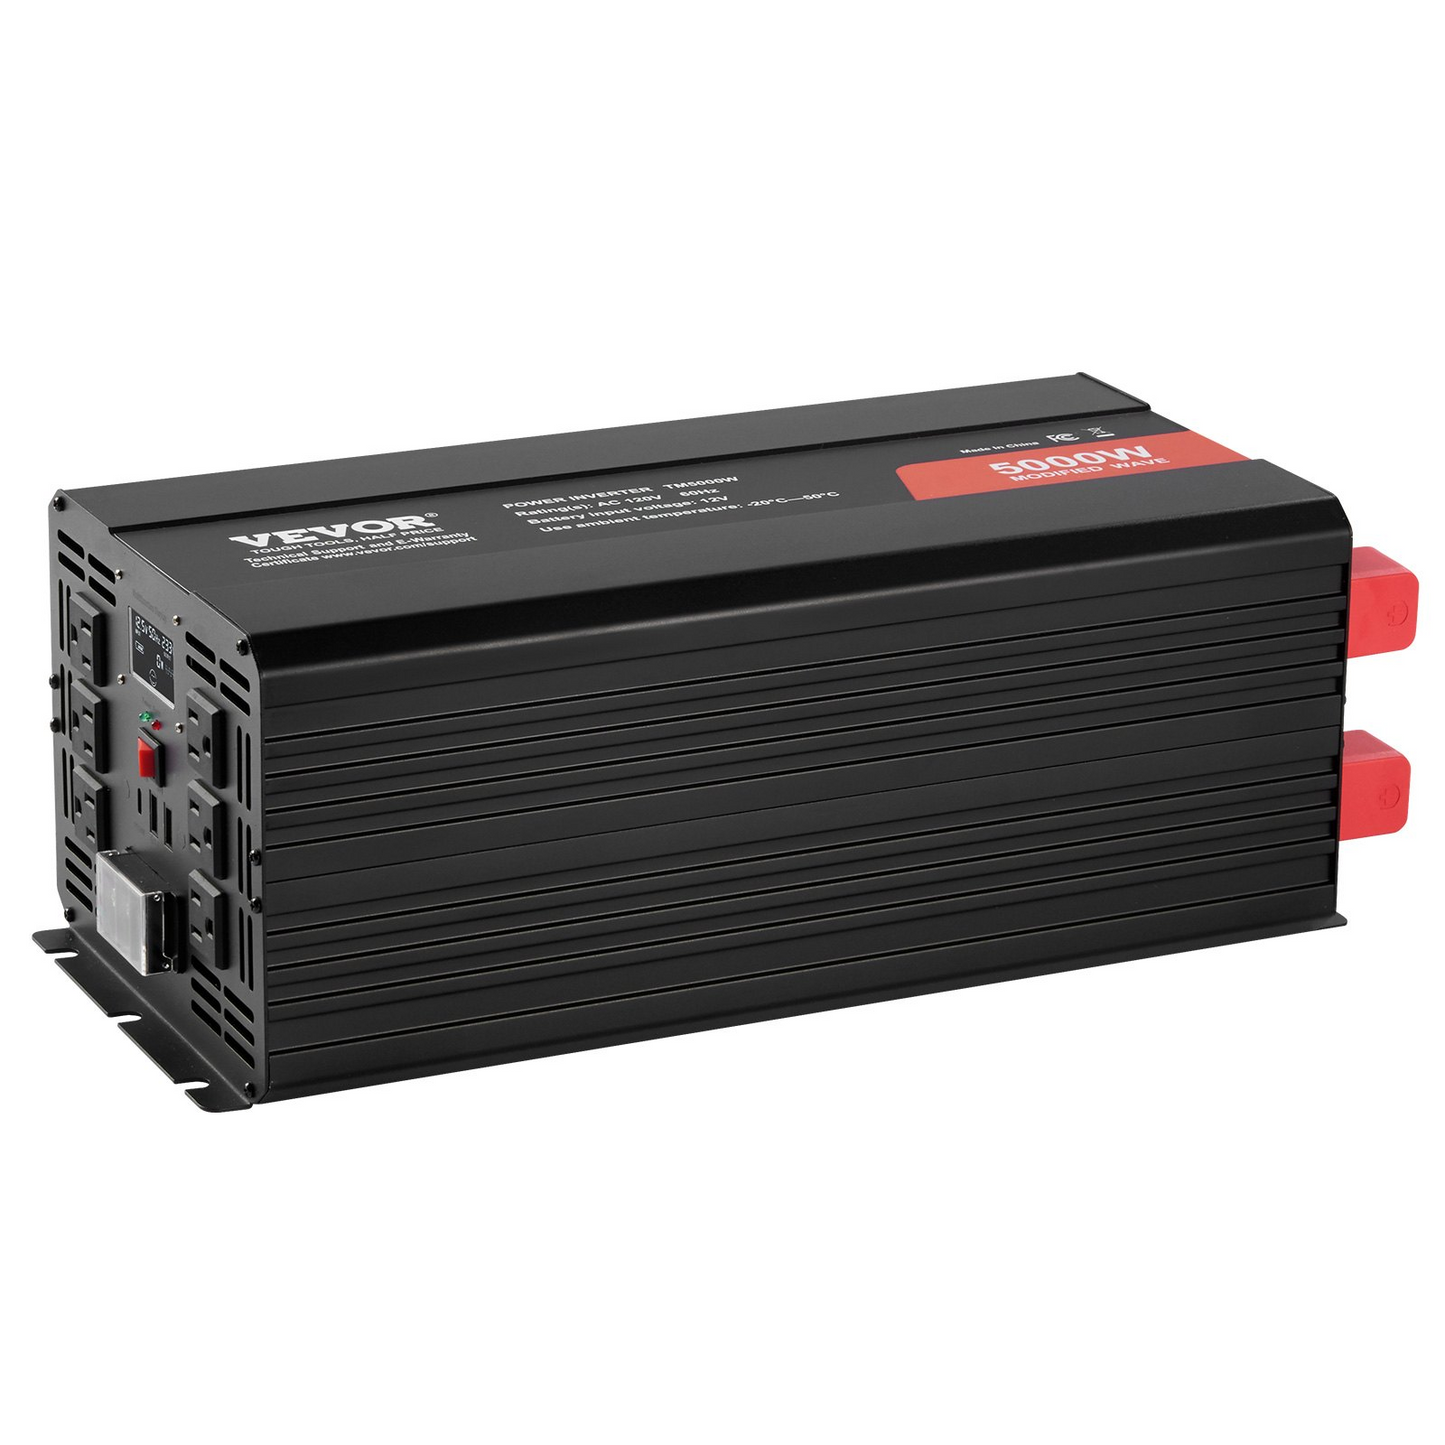 VEVOR Modified Sine Wave Inverter, 5000W, DC 12V to AC 120V Power Inverter with 6 AC Outlets 2 USB Port 1 Type-C Port, LCD Display and Remote Controller for High Load Home Appliances, CE FCC Certified, Goodies N Stuff